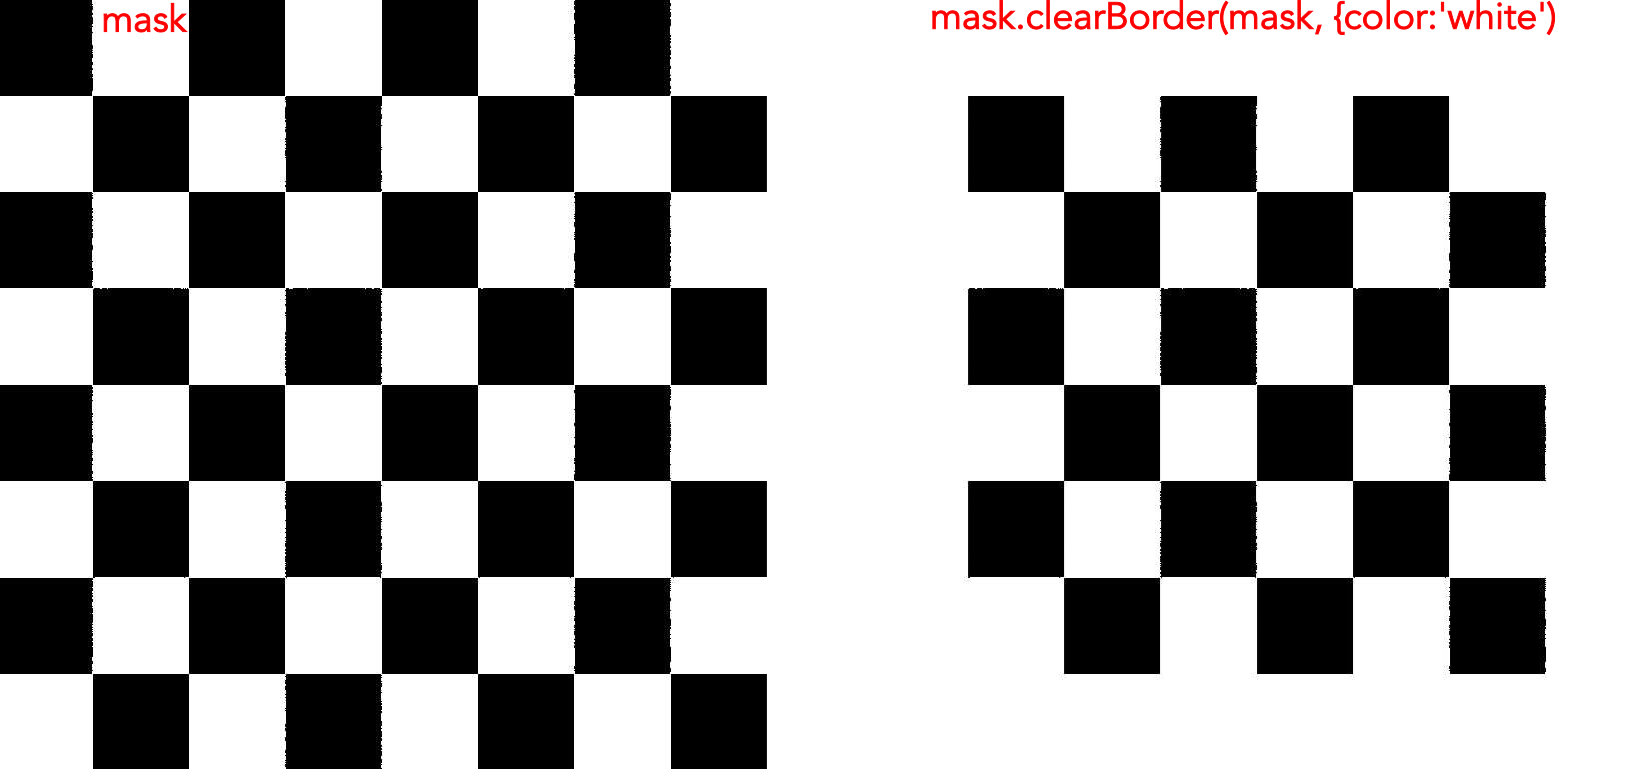 clearBorder example